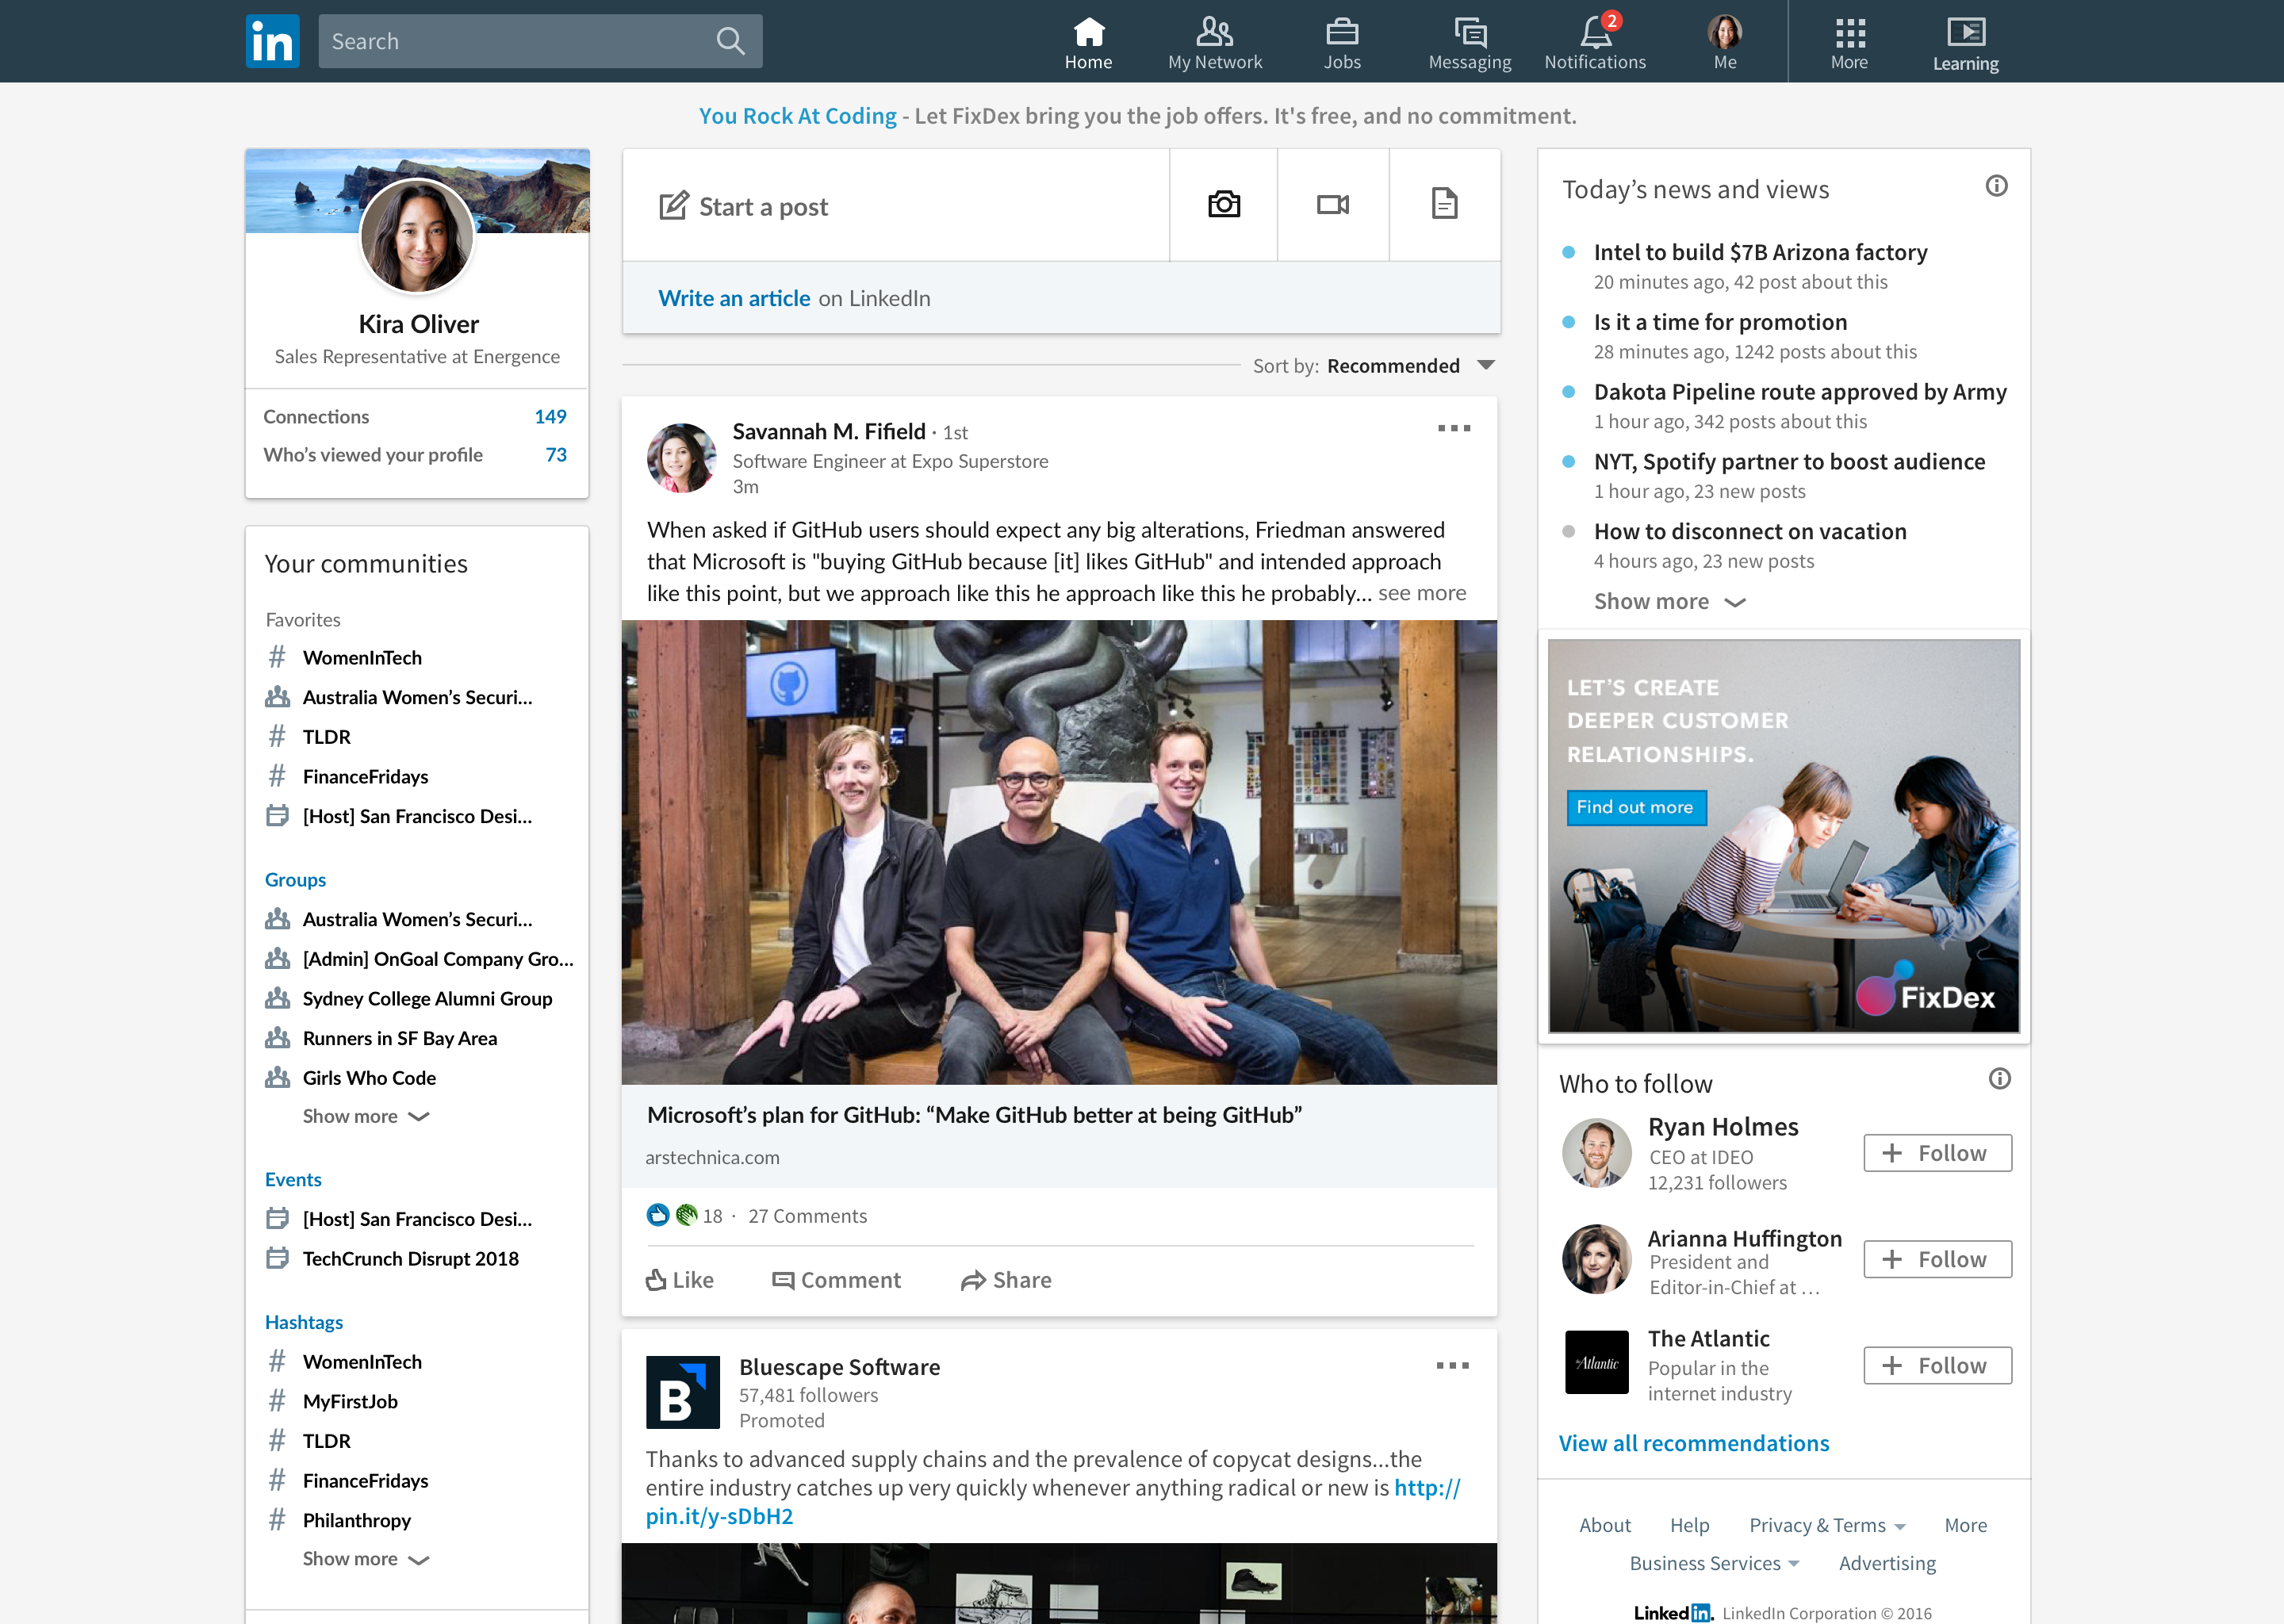 LinkedIn Changes its Algorithm to Surface More Personalized Content